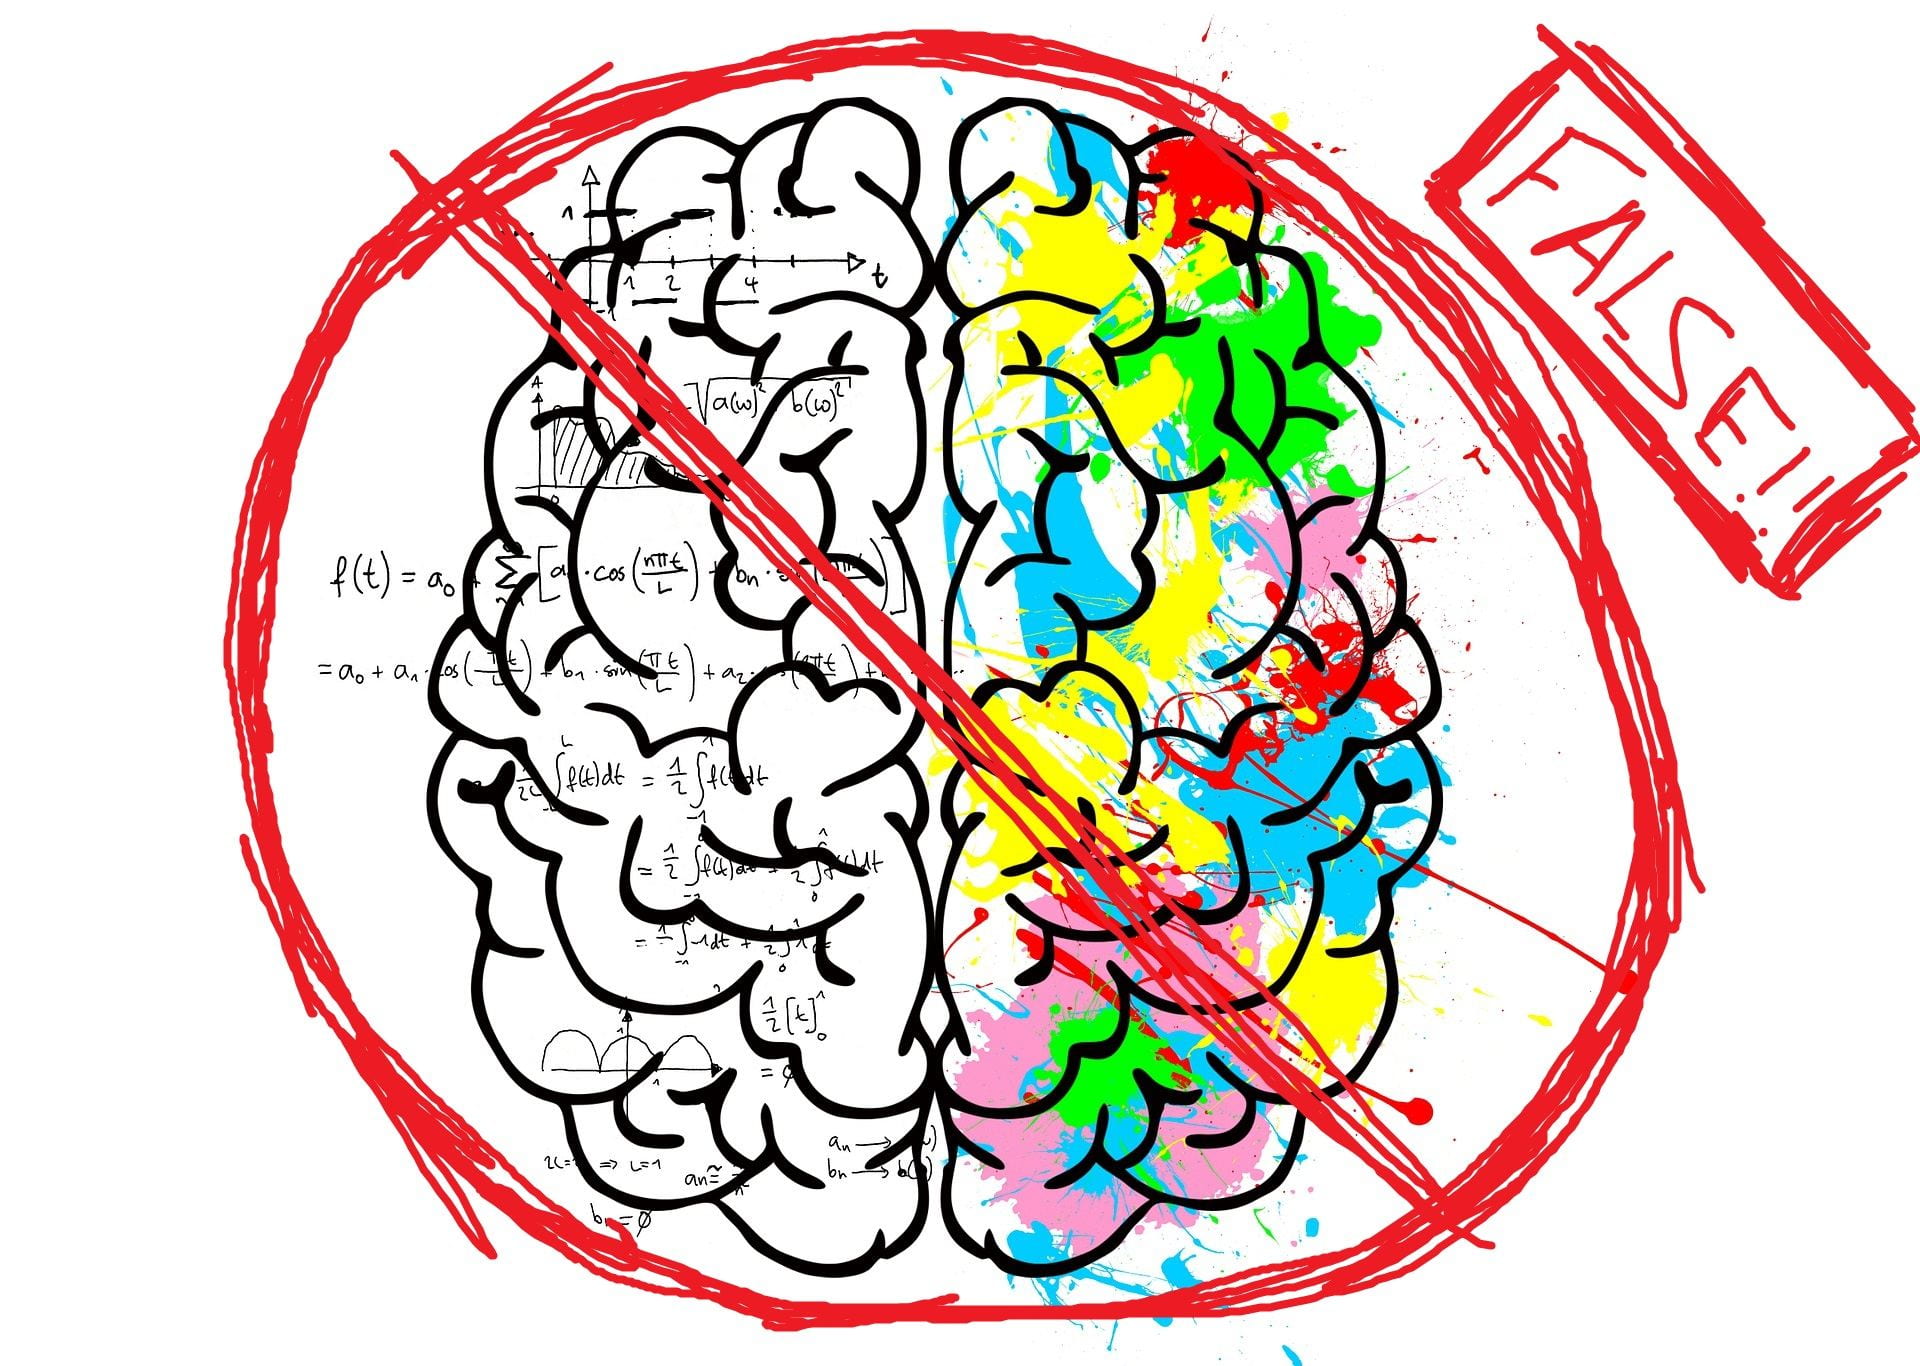 [An illustration of a ‘left’ and ‘right’ brain, where one side is filled with math equations, and the other is filled with colorful blots. The author scribbled an ‘X’ over this.